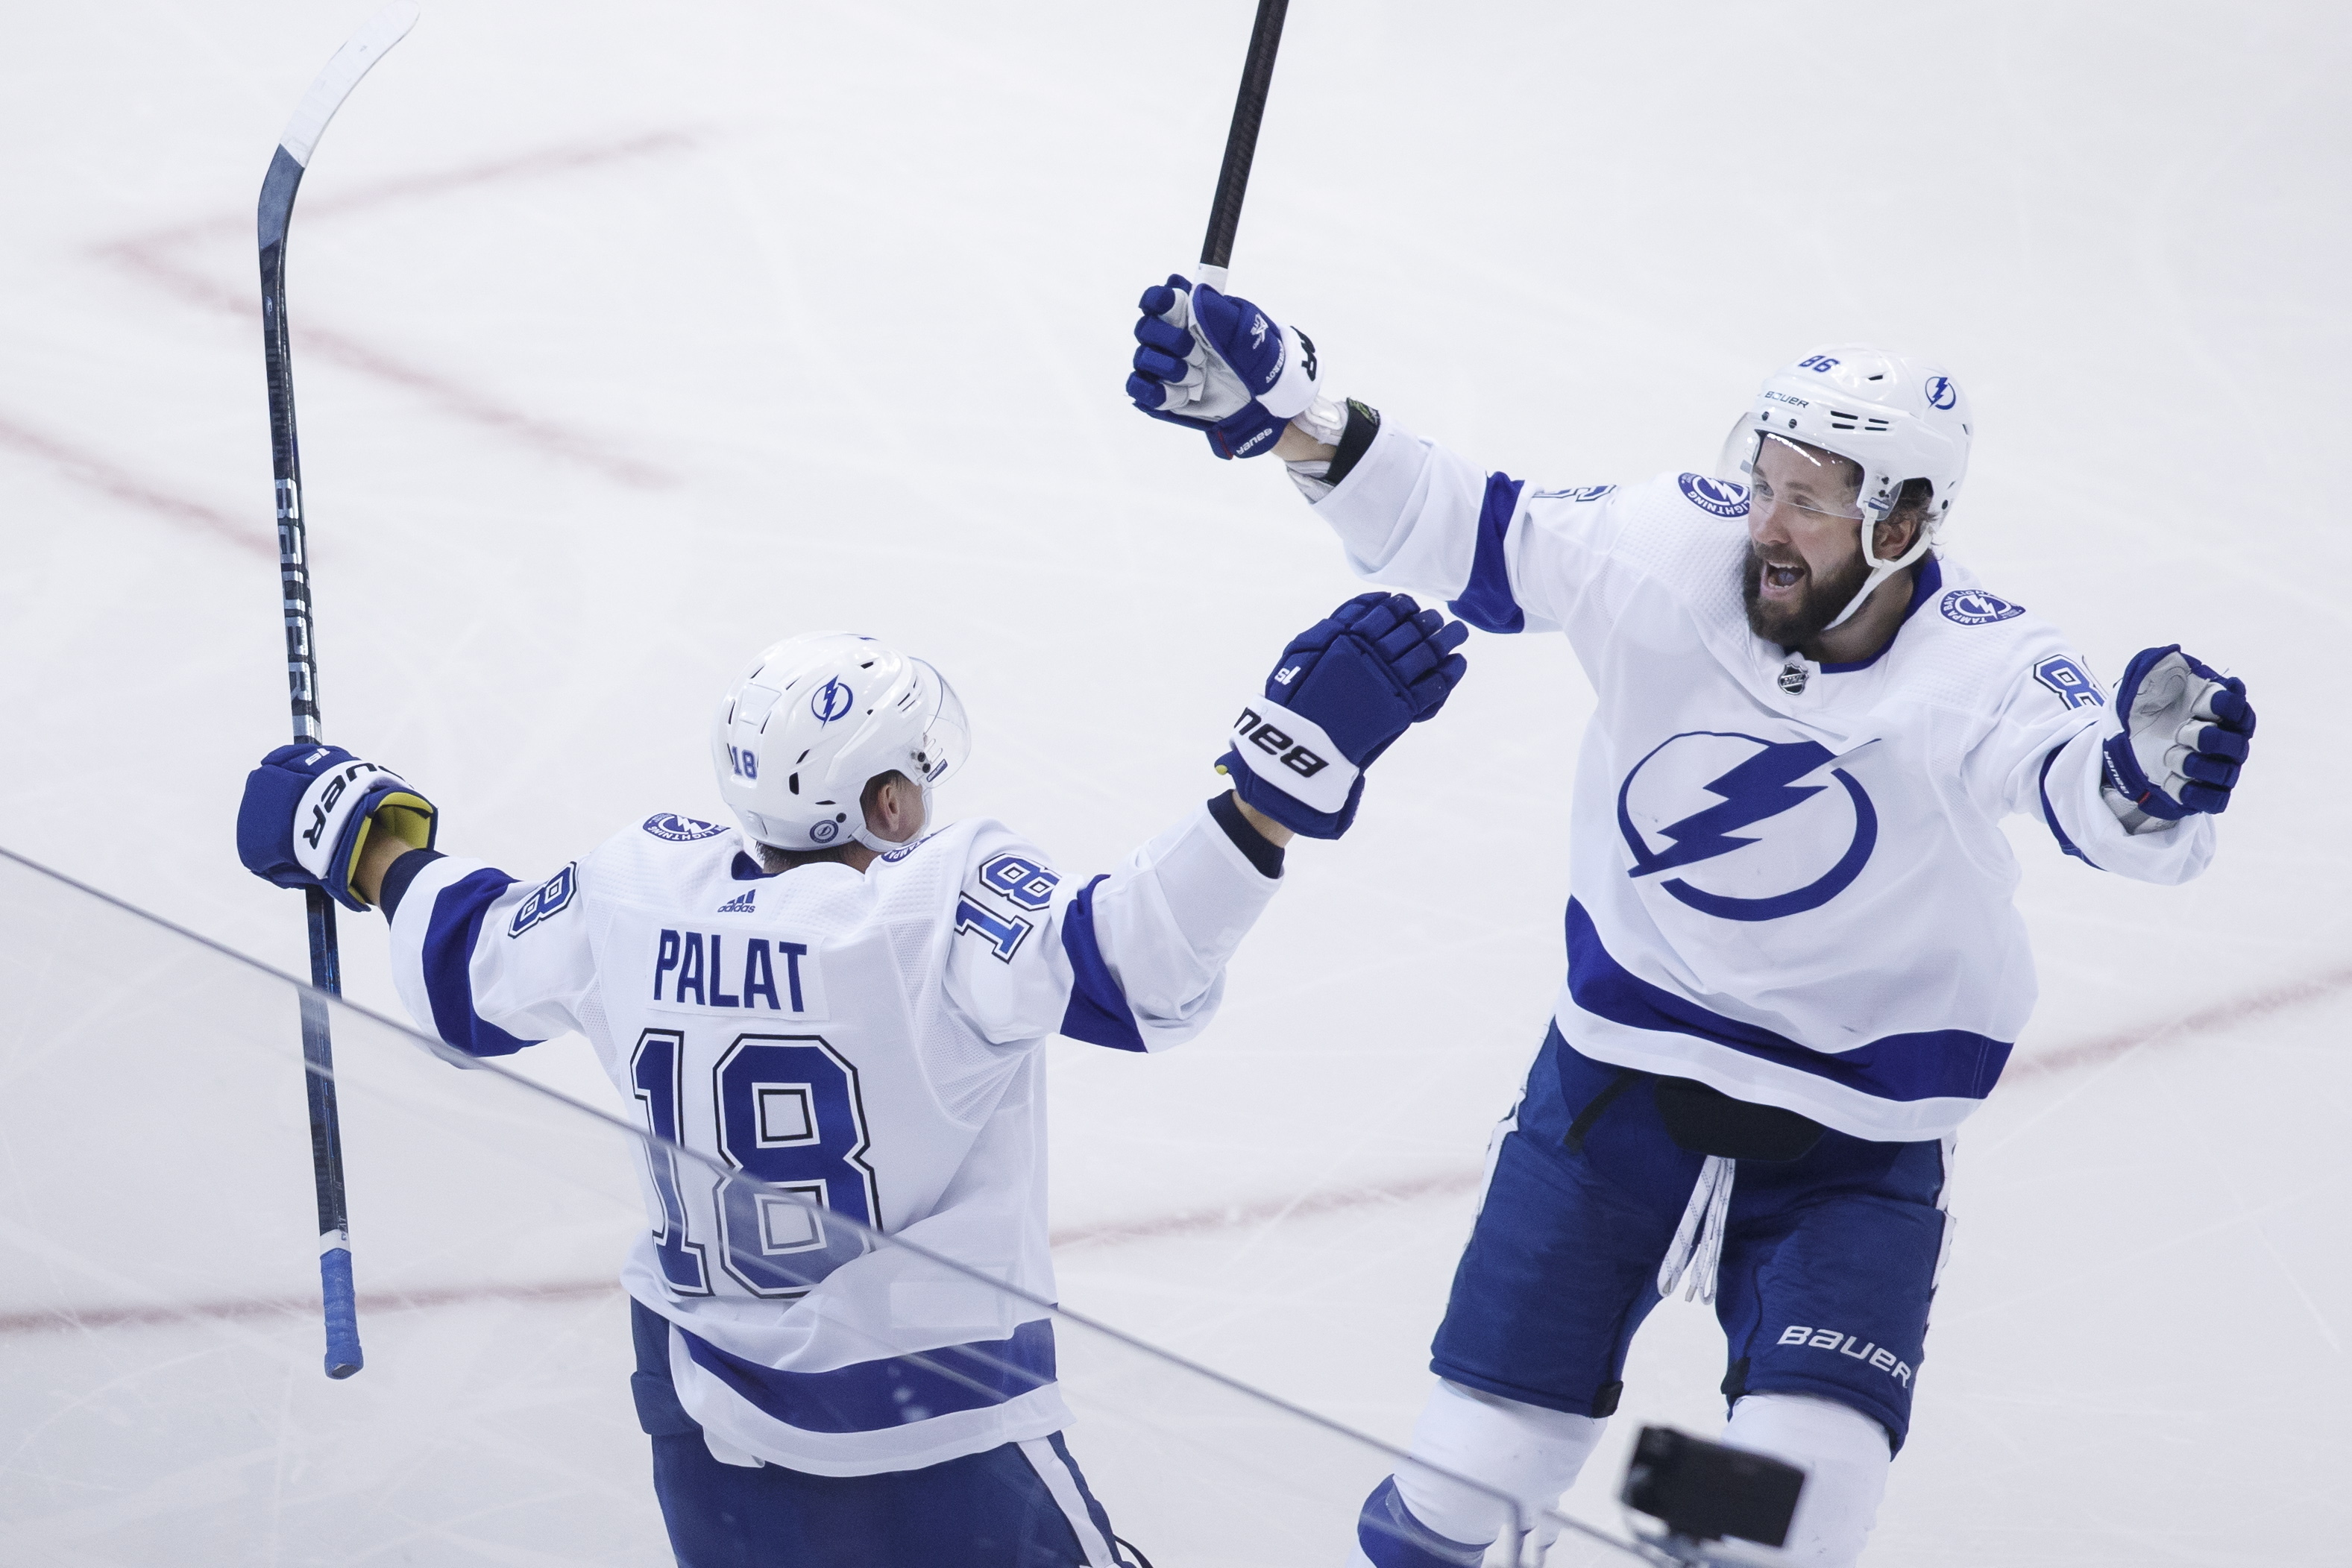 Ondrej Palat finds his scoring touch as Lightning beat Bruins in